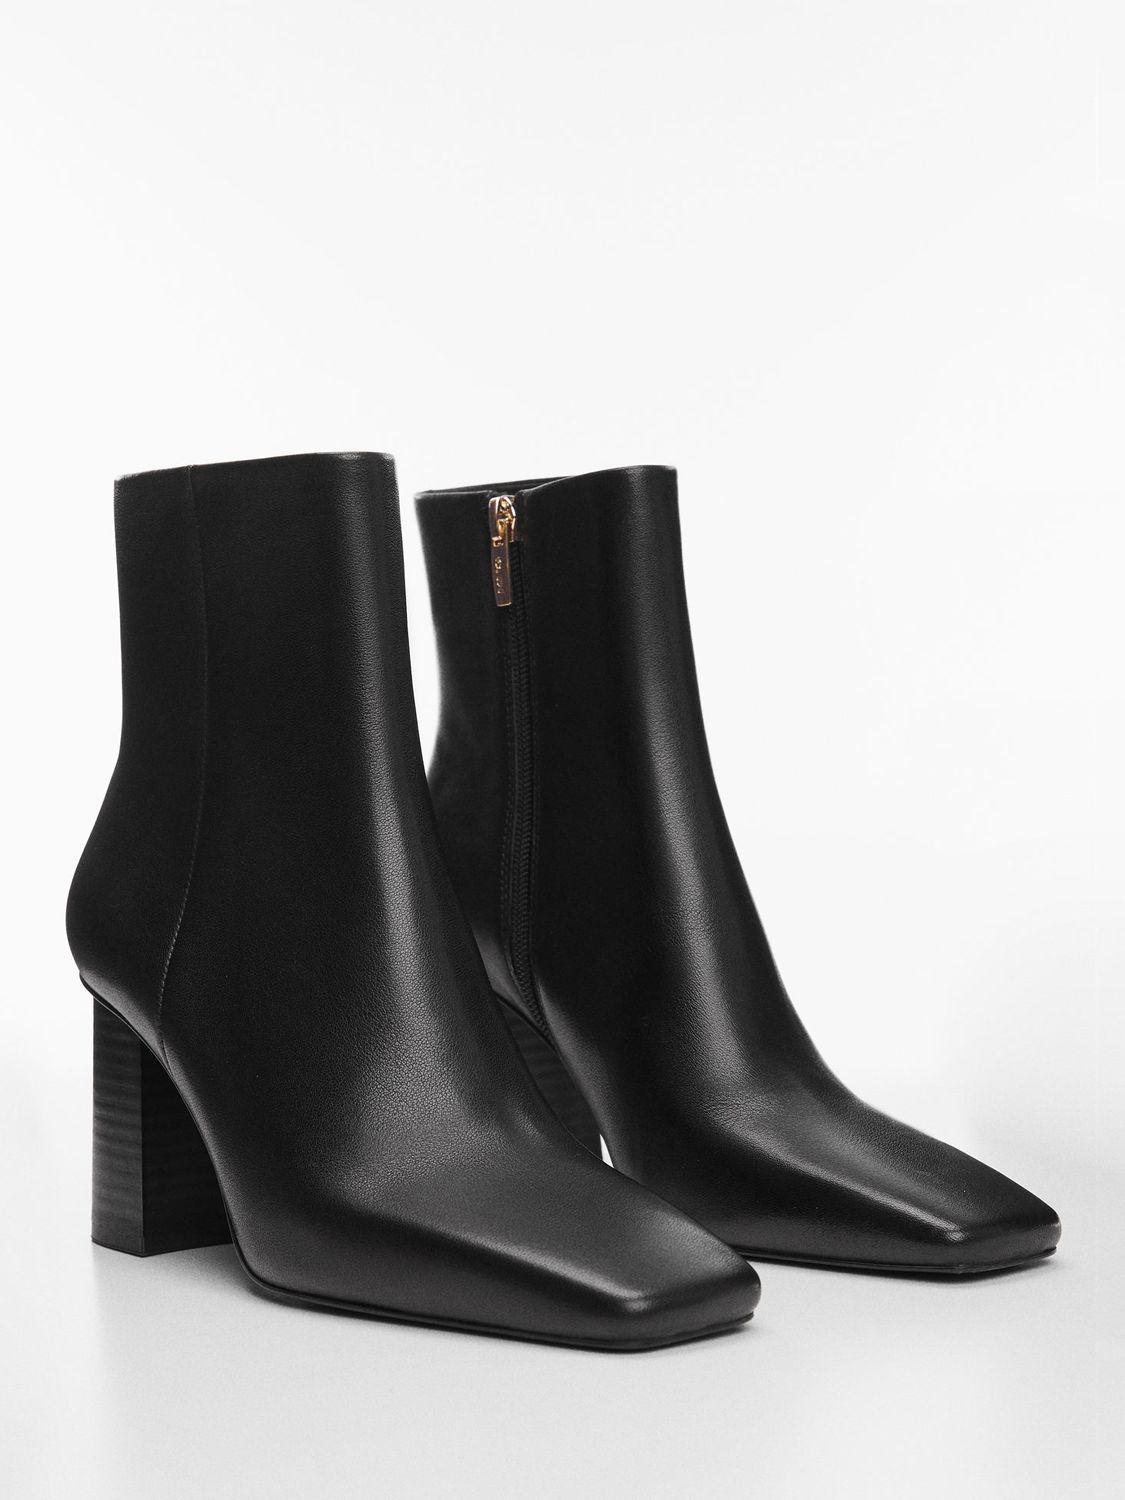 Mango Guindo Square Toe Leather Ankle Boots, Black at John Lewis & Partners